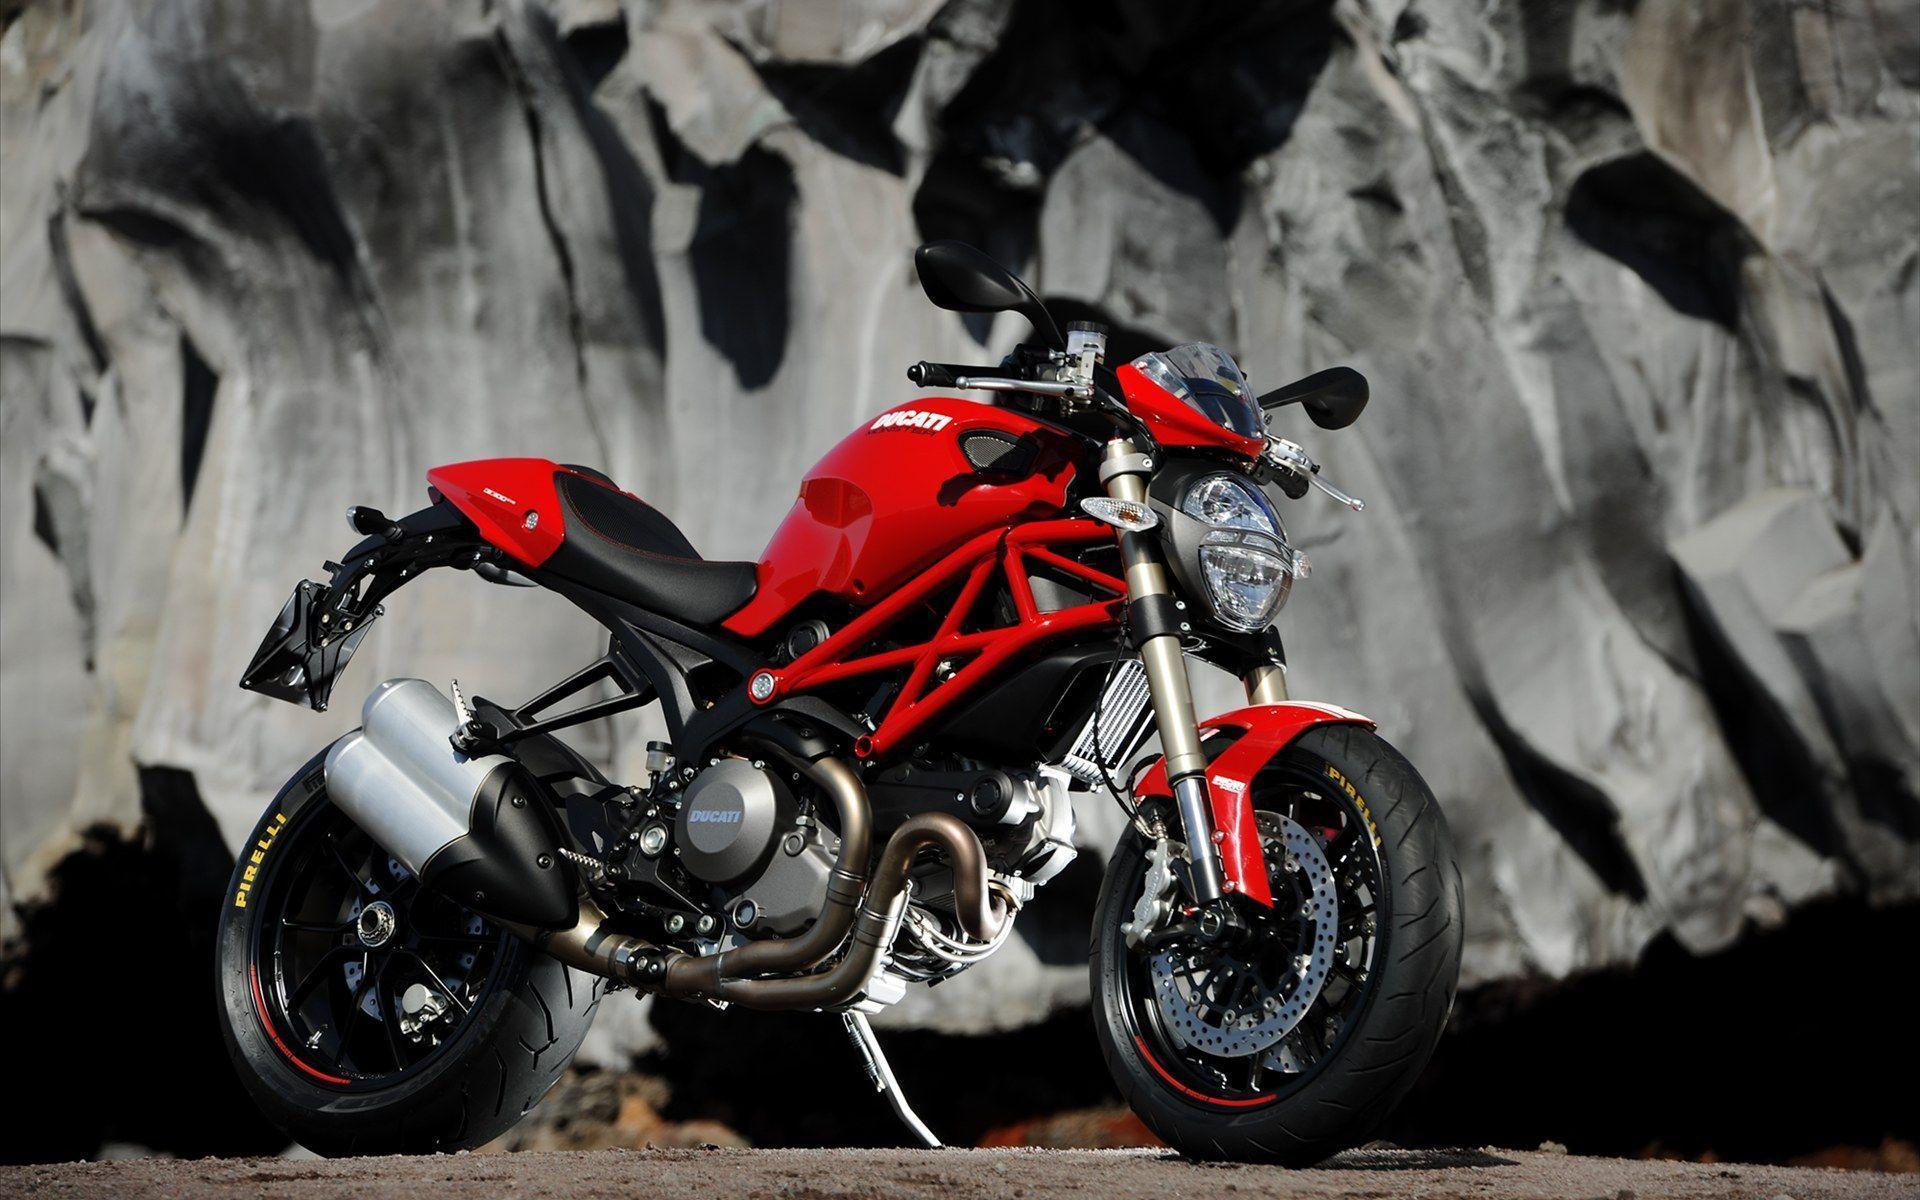 Bikes Background In High Quality: Ducati by Justin Bruno, August